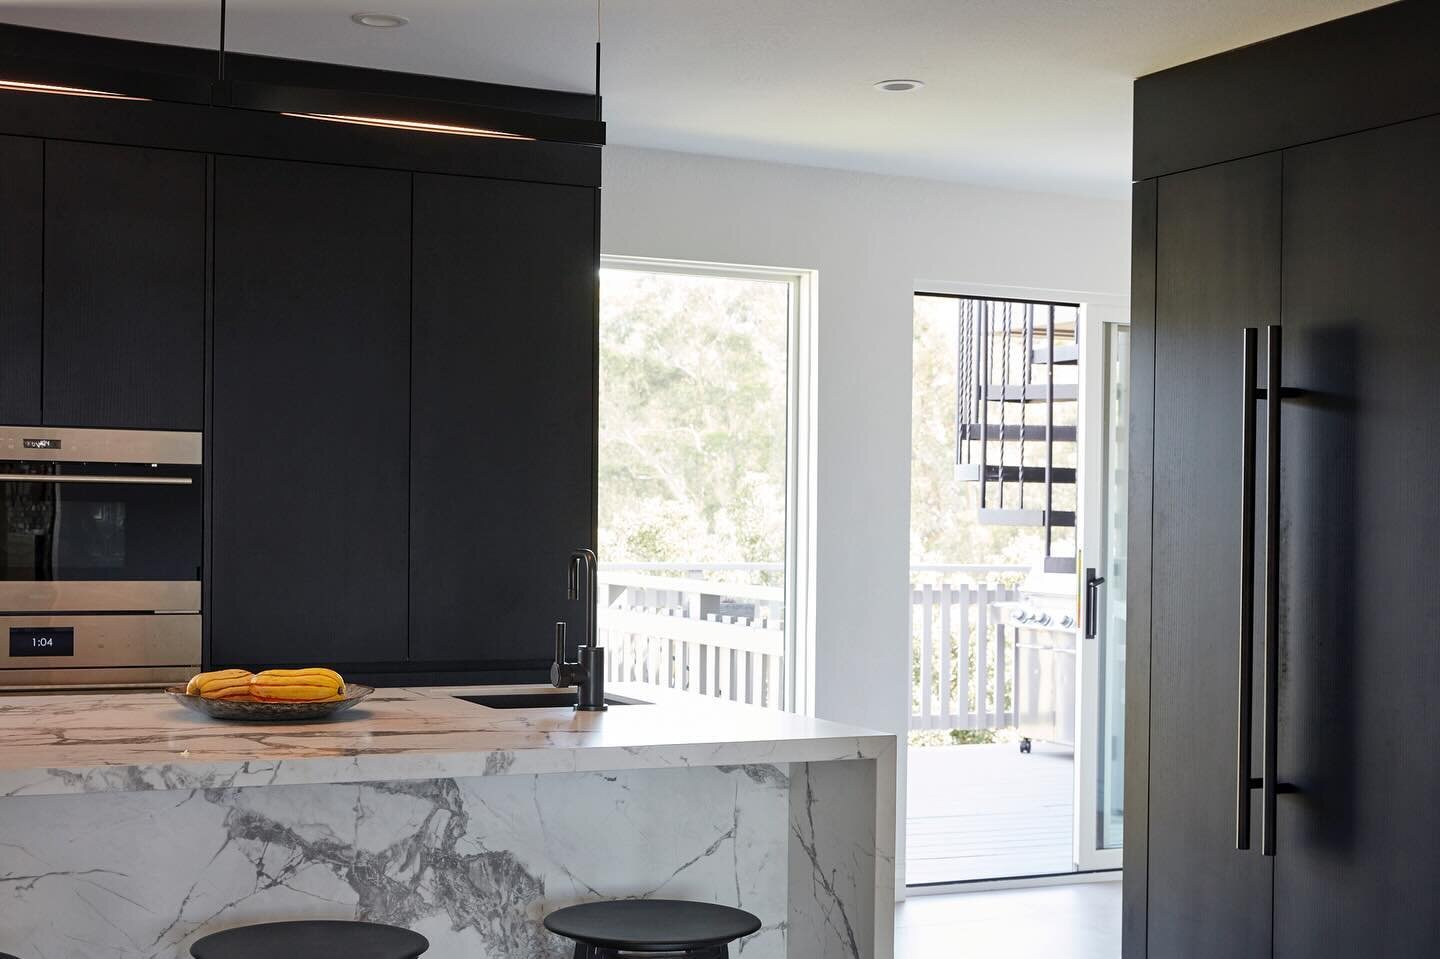 The tidiest black and white kitchen where every item and ingredient has a place and can be hidden away.
📷 @greggsegal 

See more of this kitchen renovation: #RiceCabinetKitchen

#BlueTruckStudio&nbsp;#ResidentialDesign&nbsp;#CaliforniaArchitect&nbsp